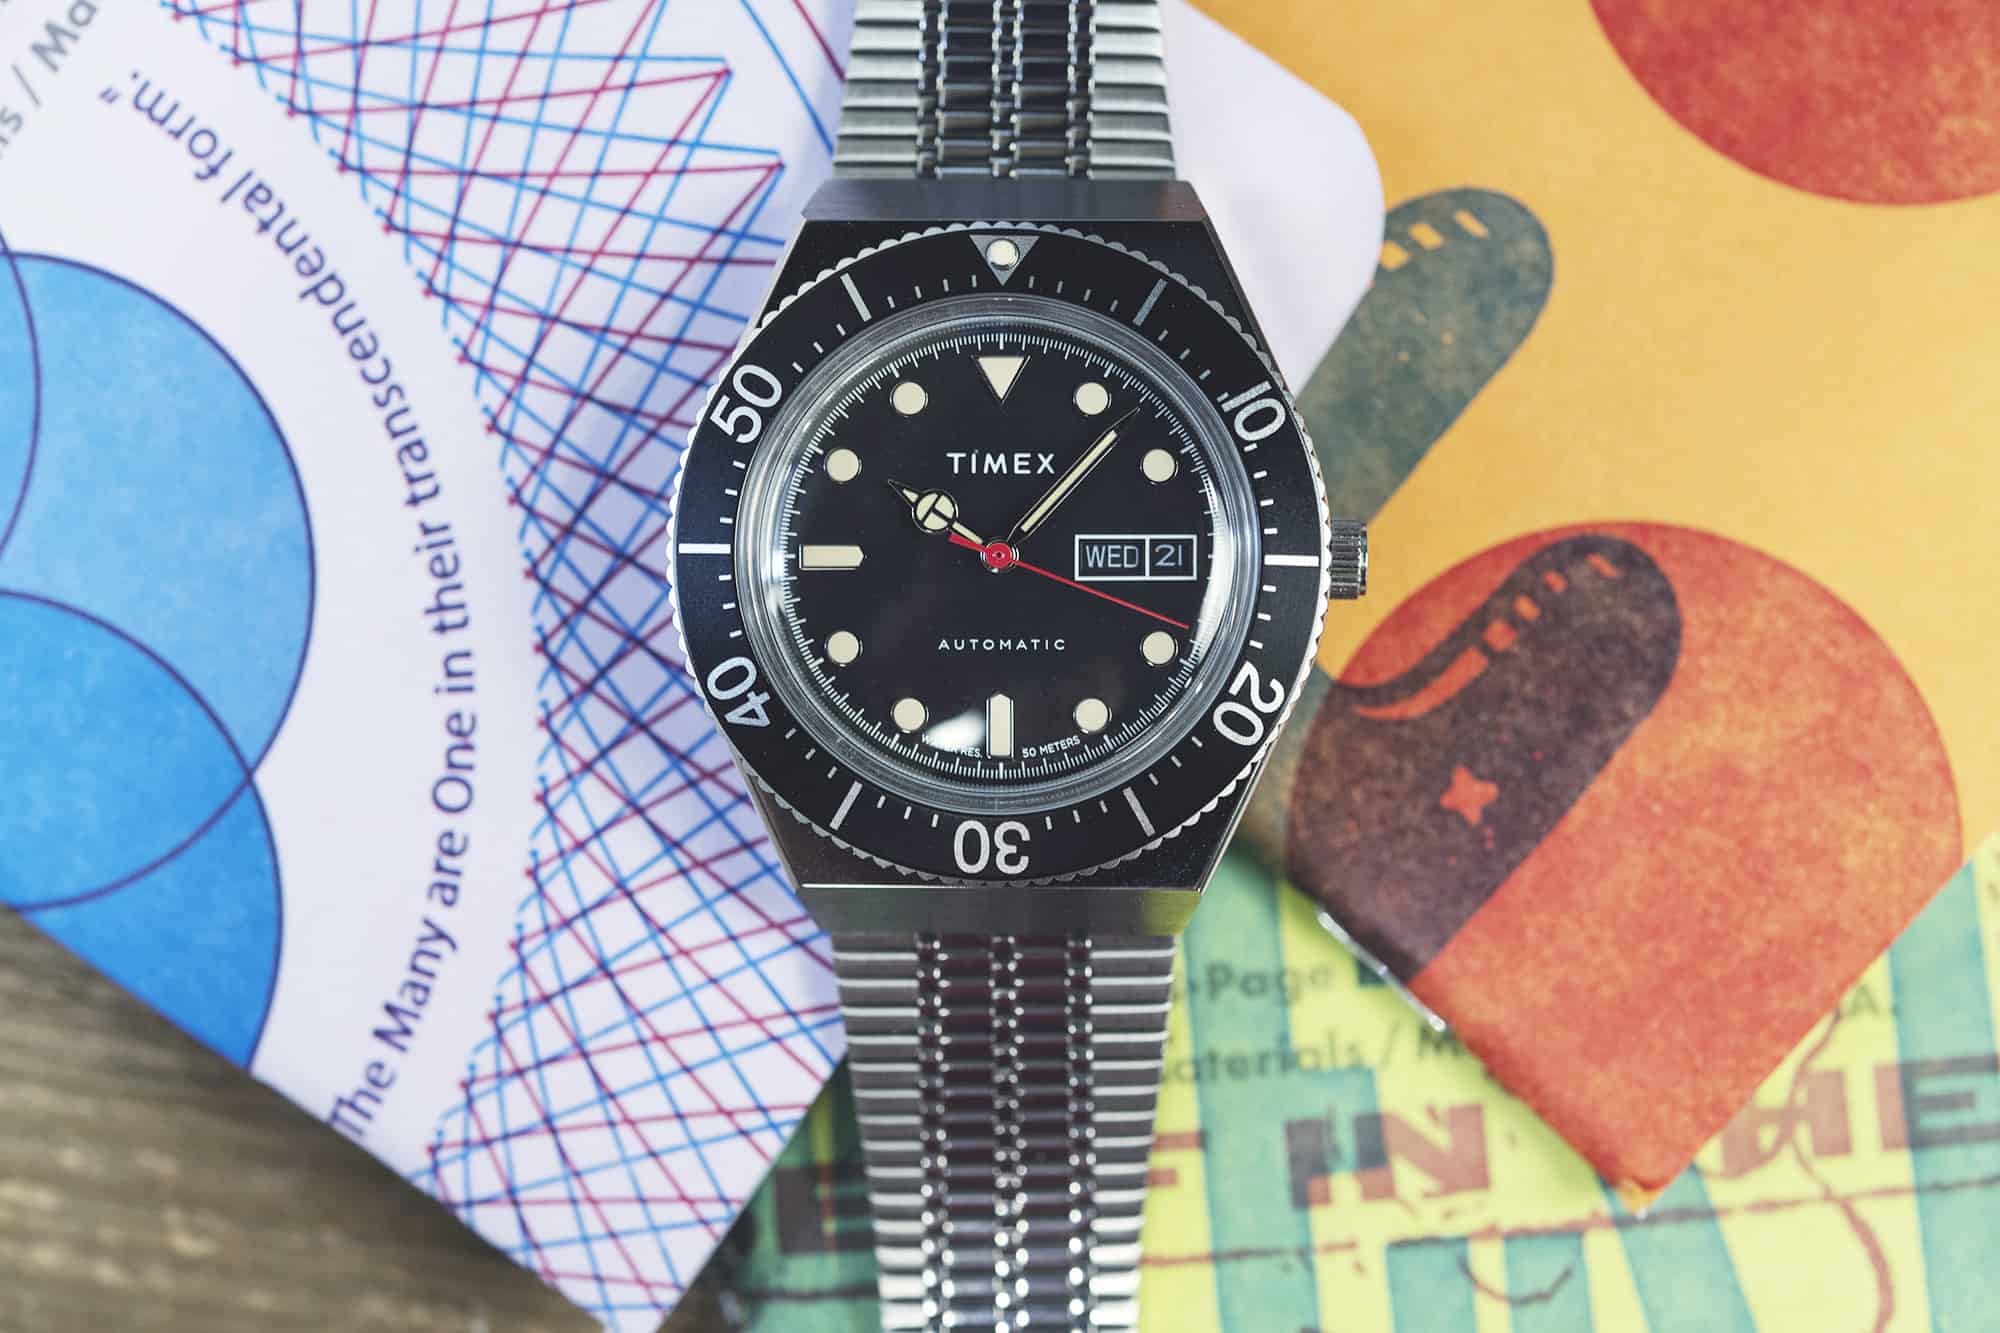 Hands On With the Timex M79 Black